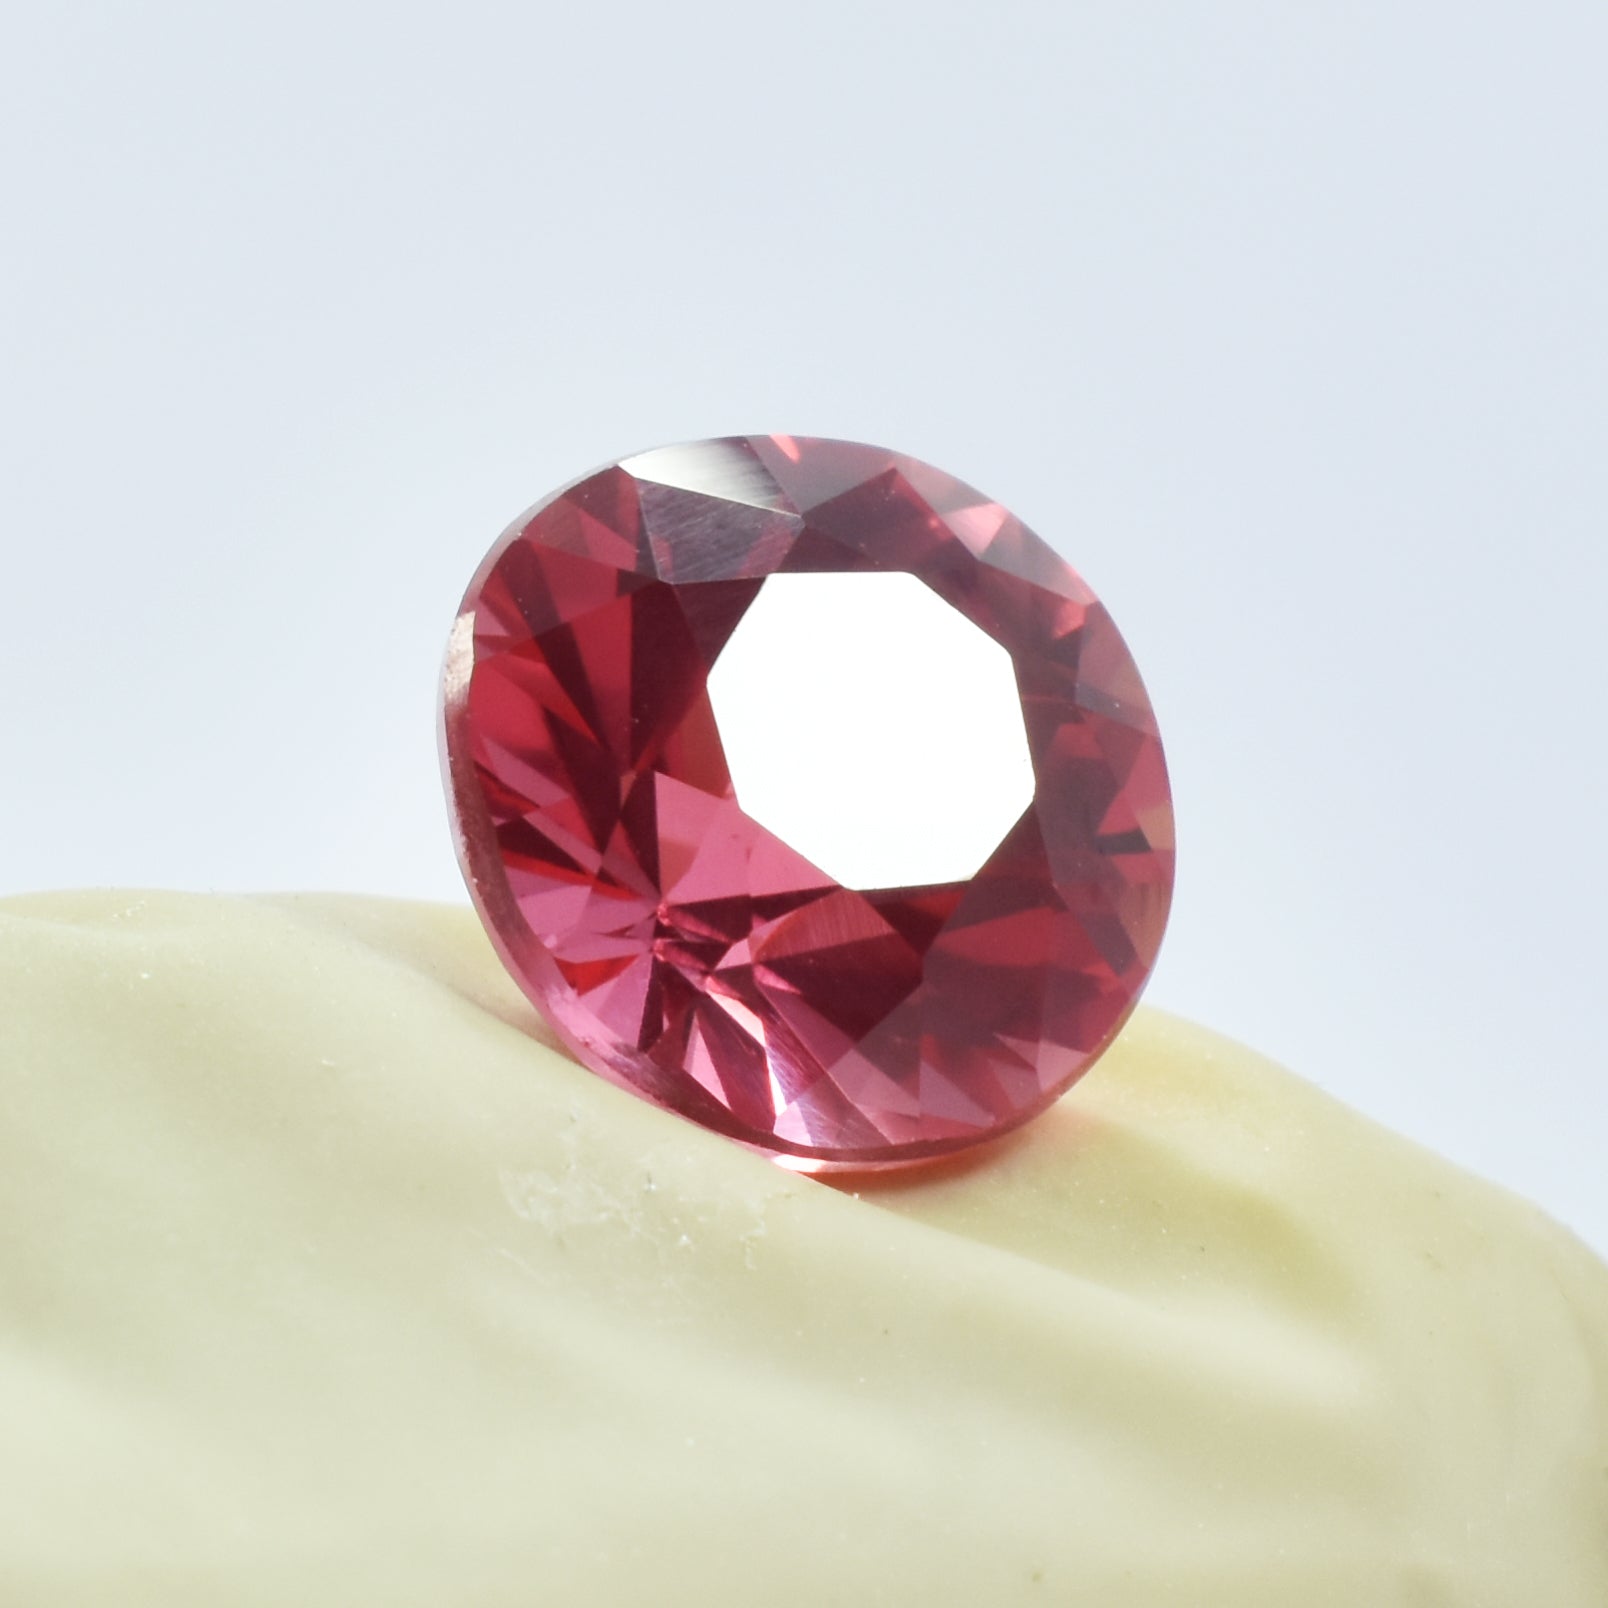 SAPPHIRE -  Improves Mental Clarity And Focus ,Certified Round Shape 9.65 Carat Natural Loose Gemstone Padparadscha Sapphire | Free Shipping With Extra Gift | Best Offer